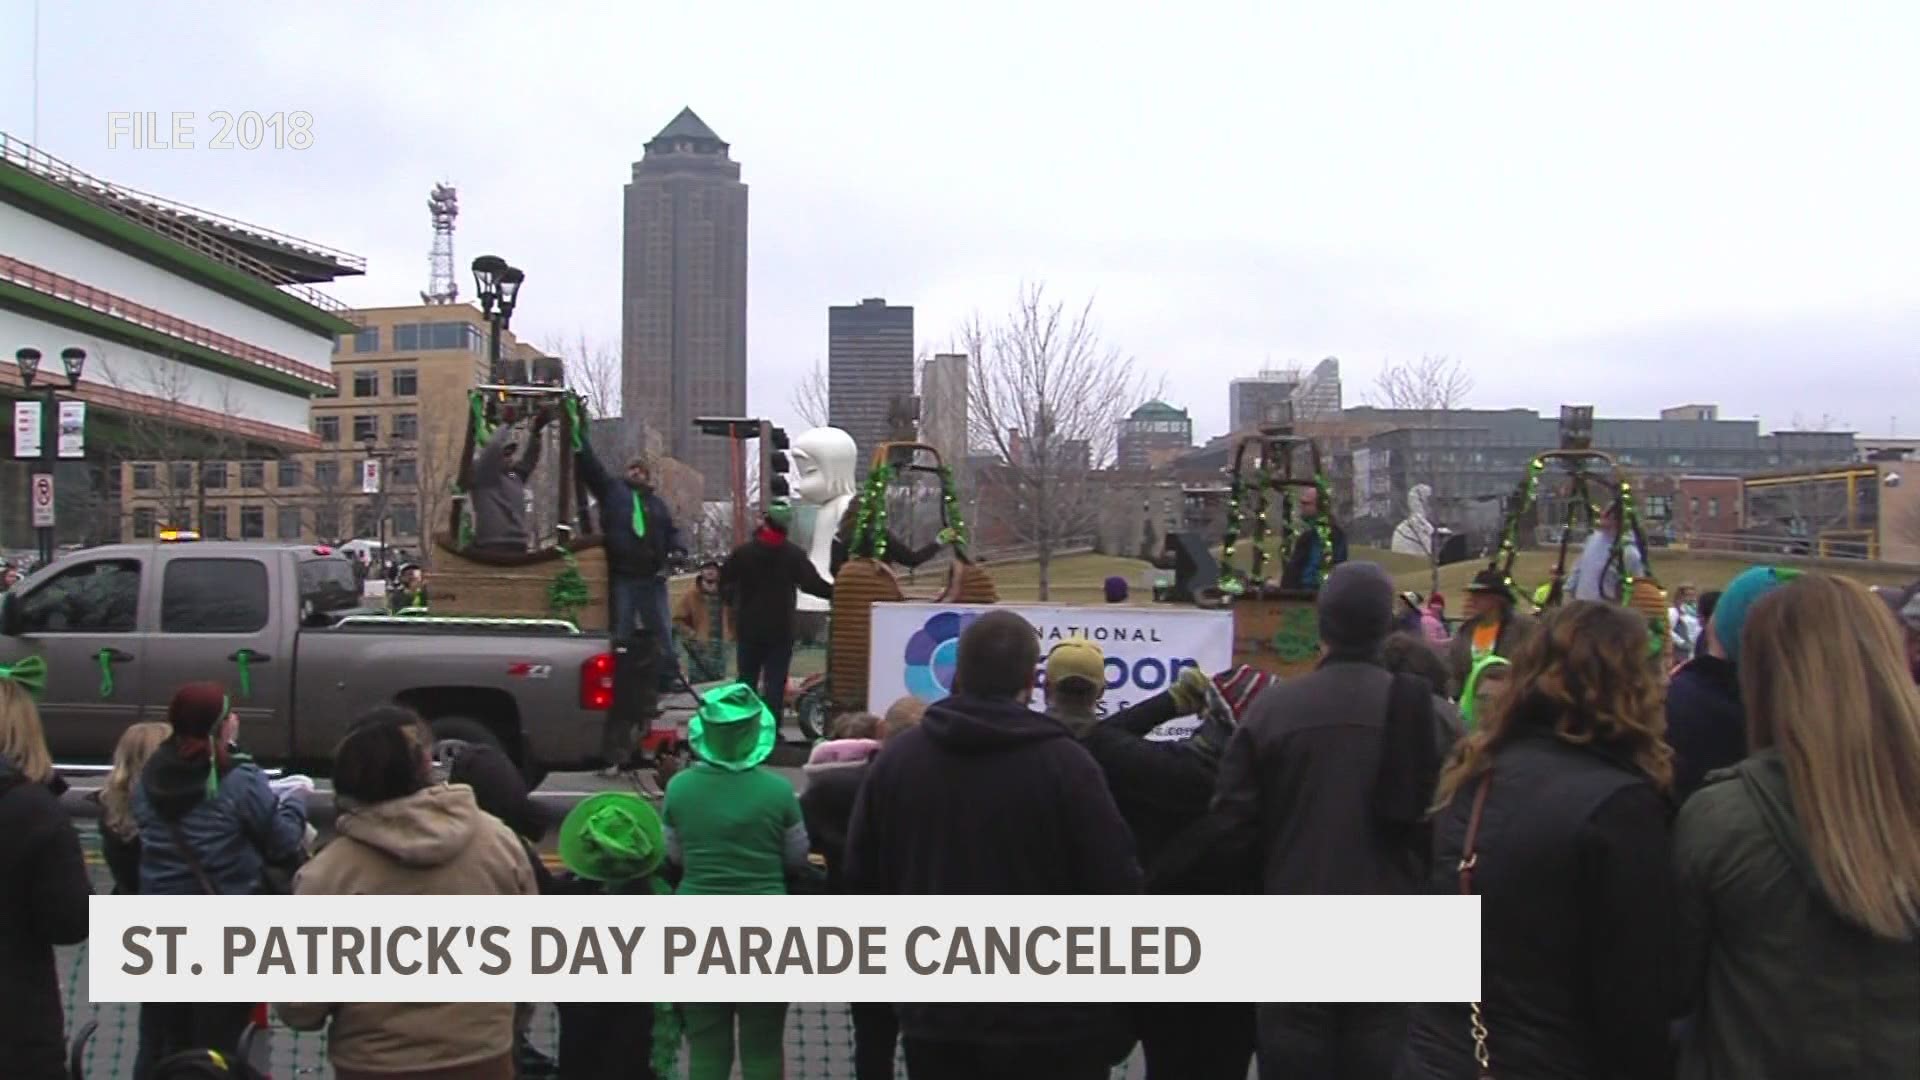 The Friendly Sons of St. Patrick of Central Iowa are asking the public to help continue their tradition by donating to local groups and food pantries.